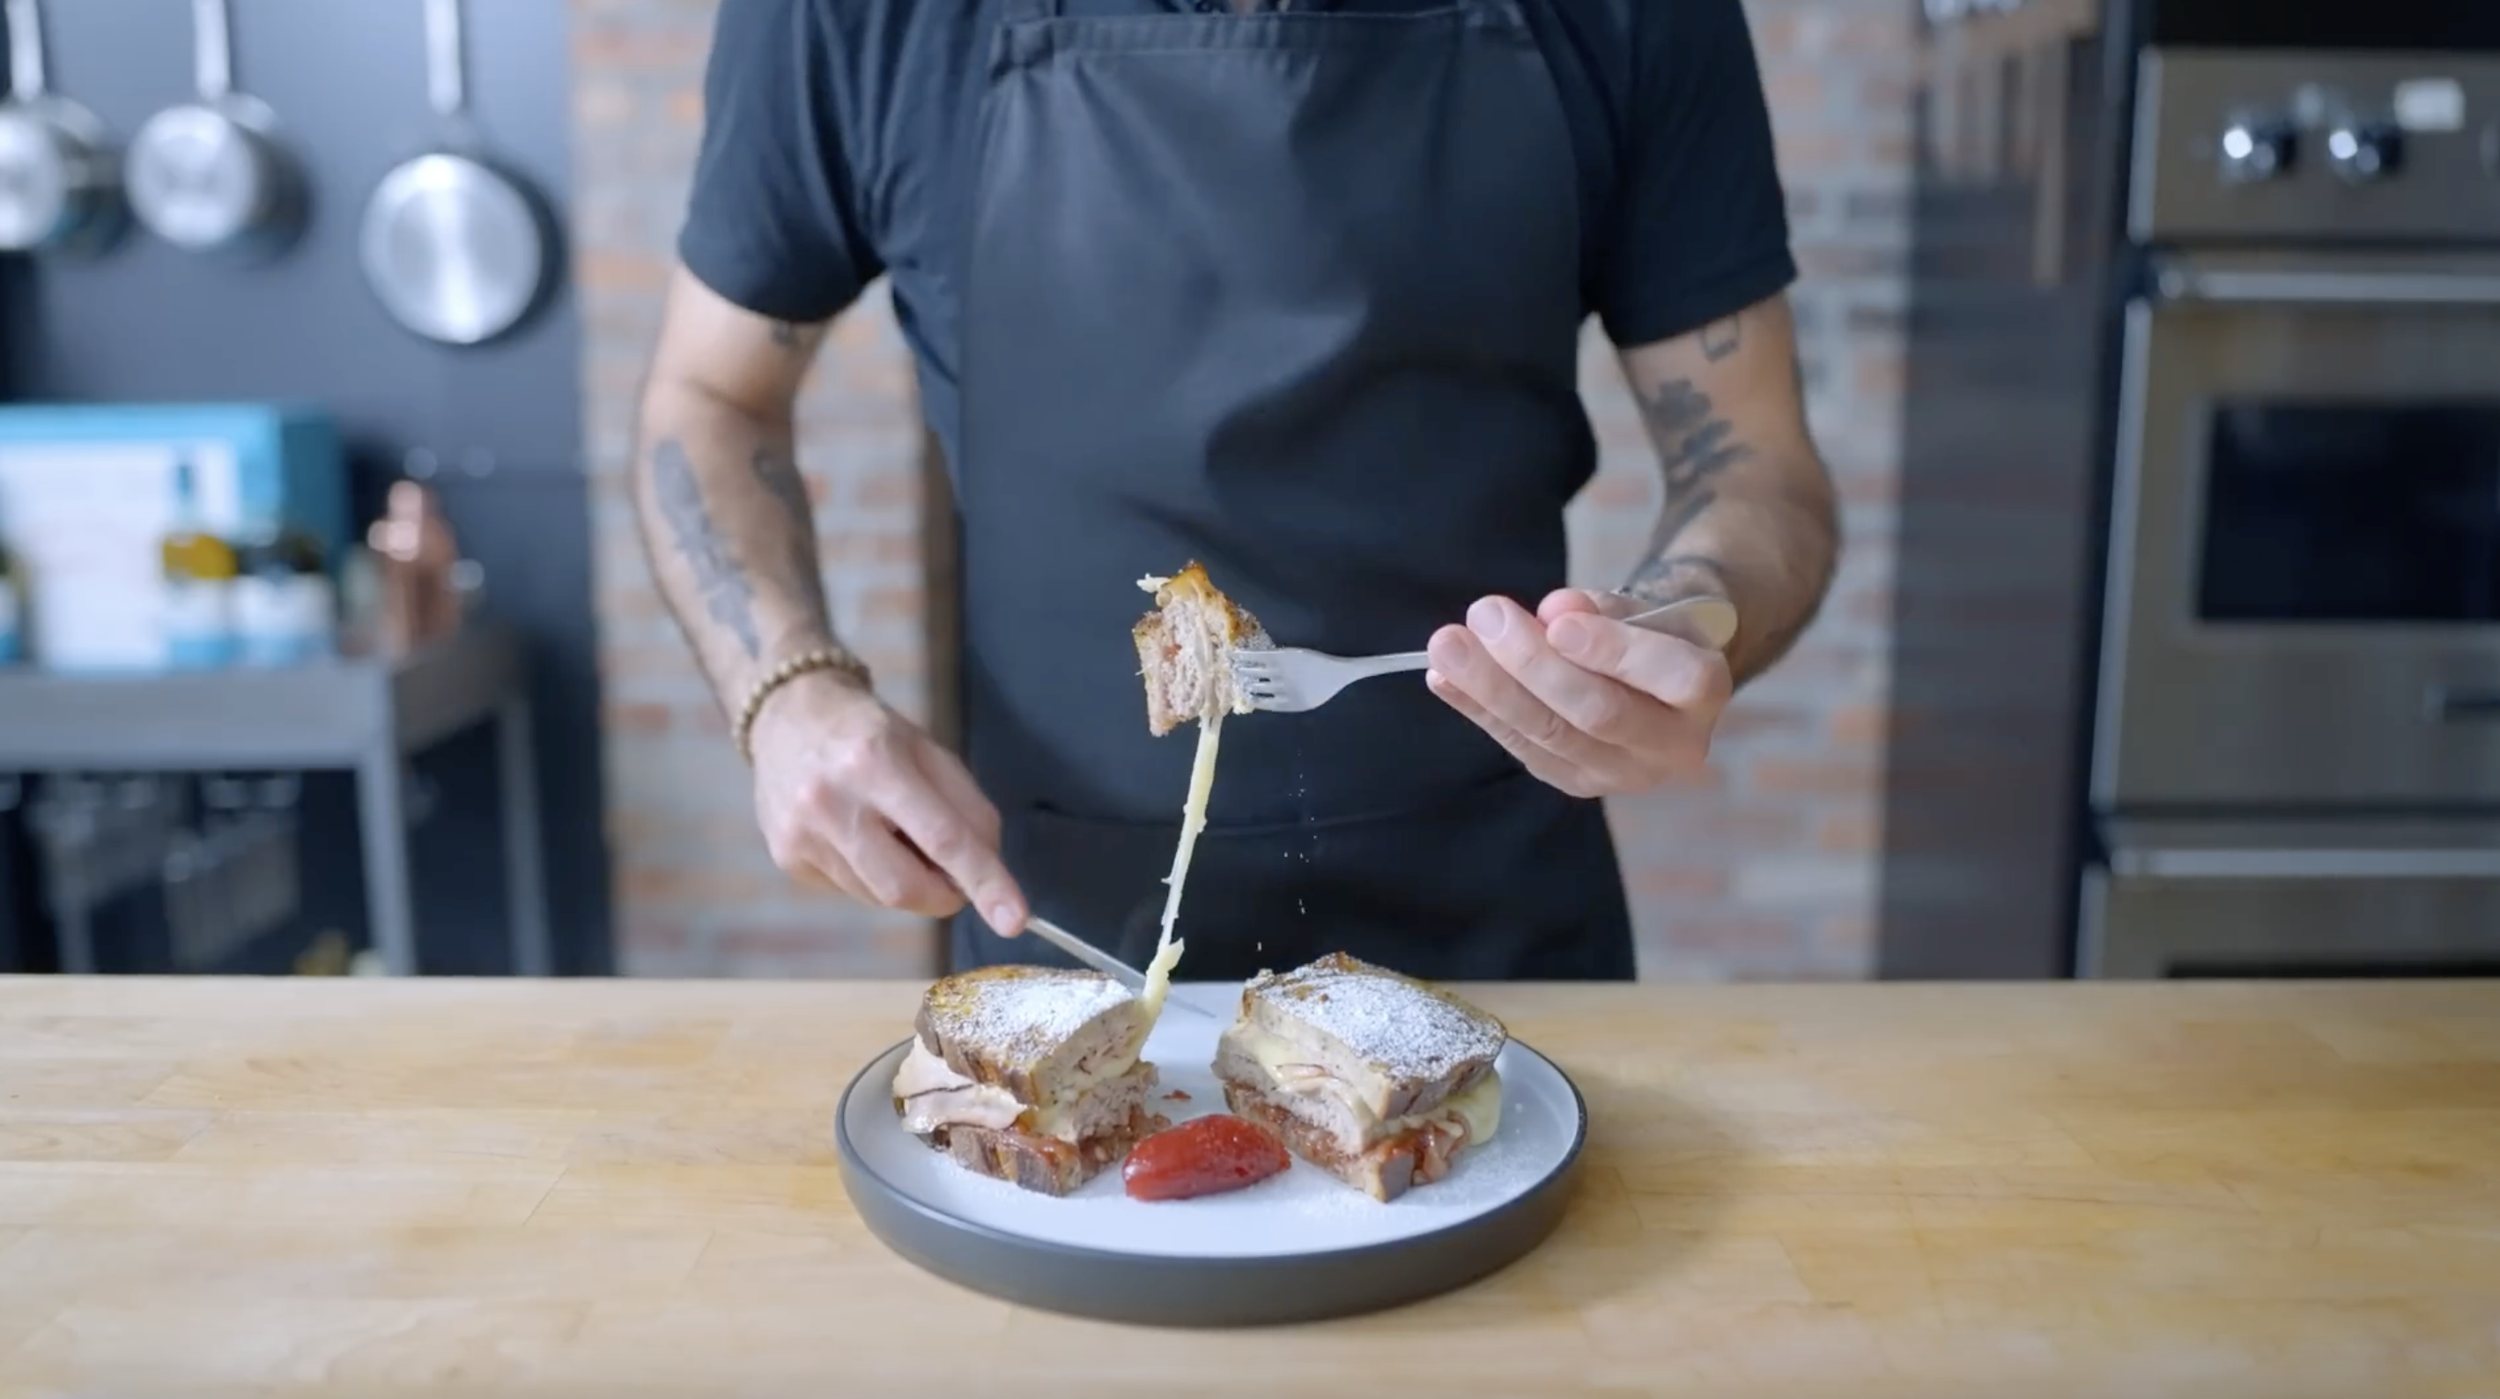 Monte Cristo inspired by American Dad — Binging With Babish